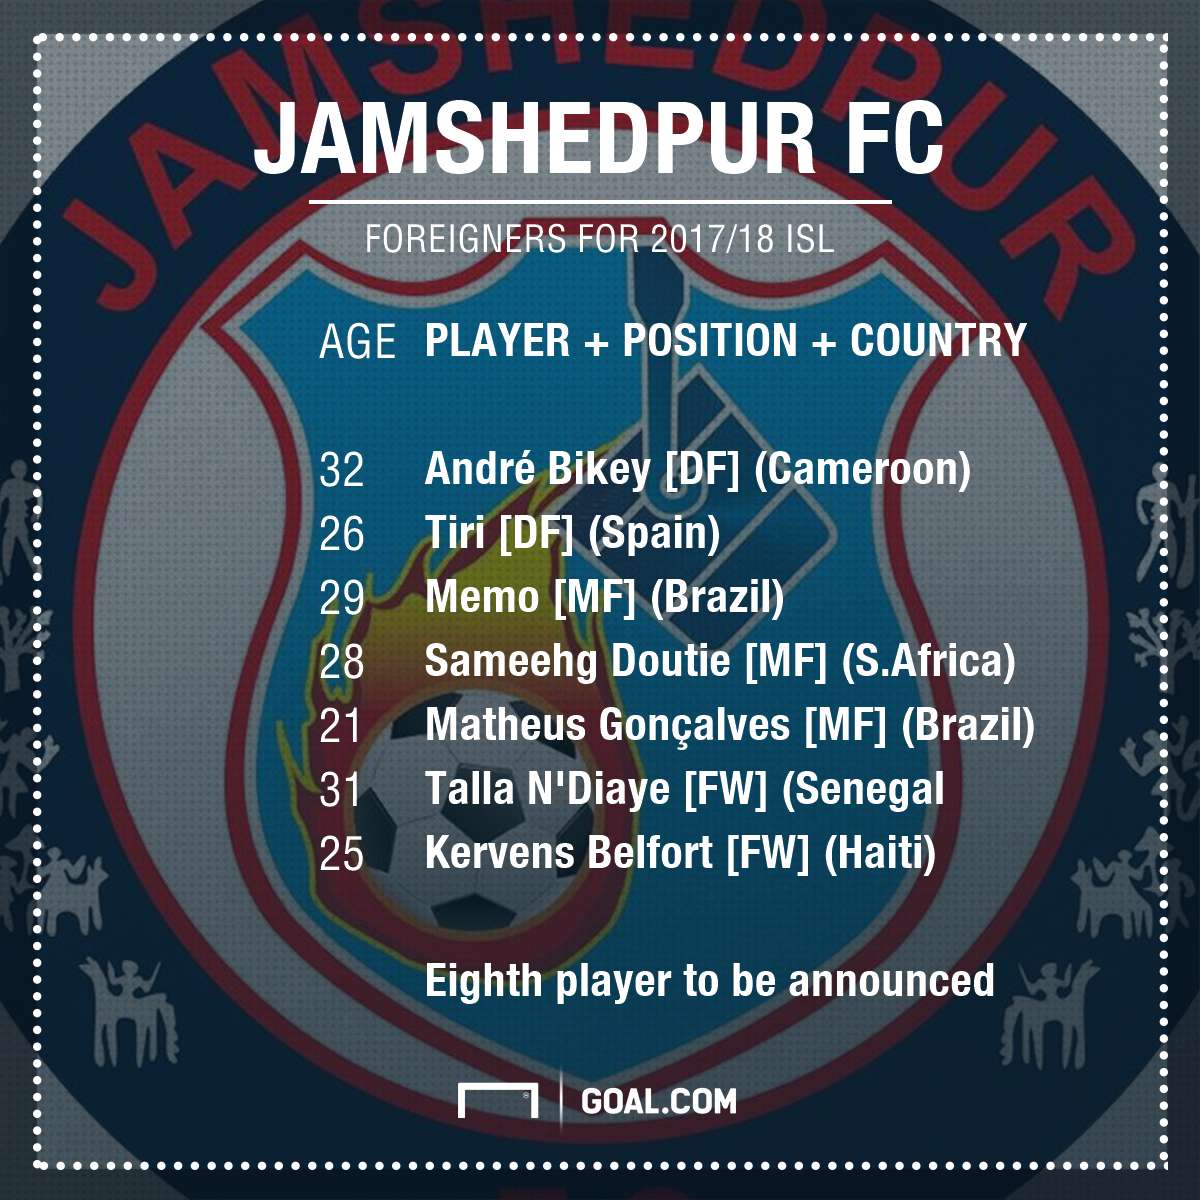 Jamshedpur FC Foreigners